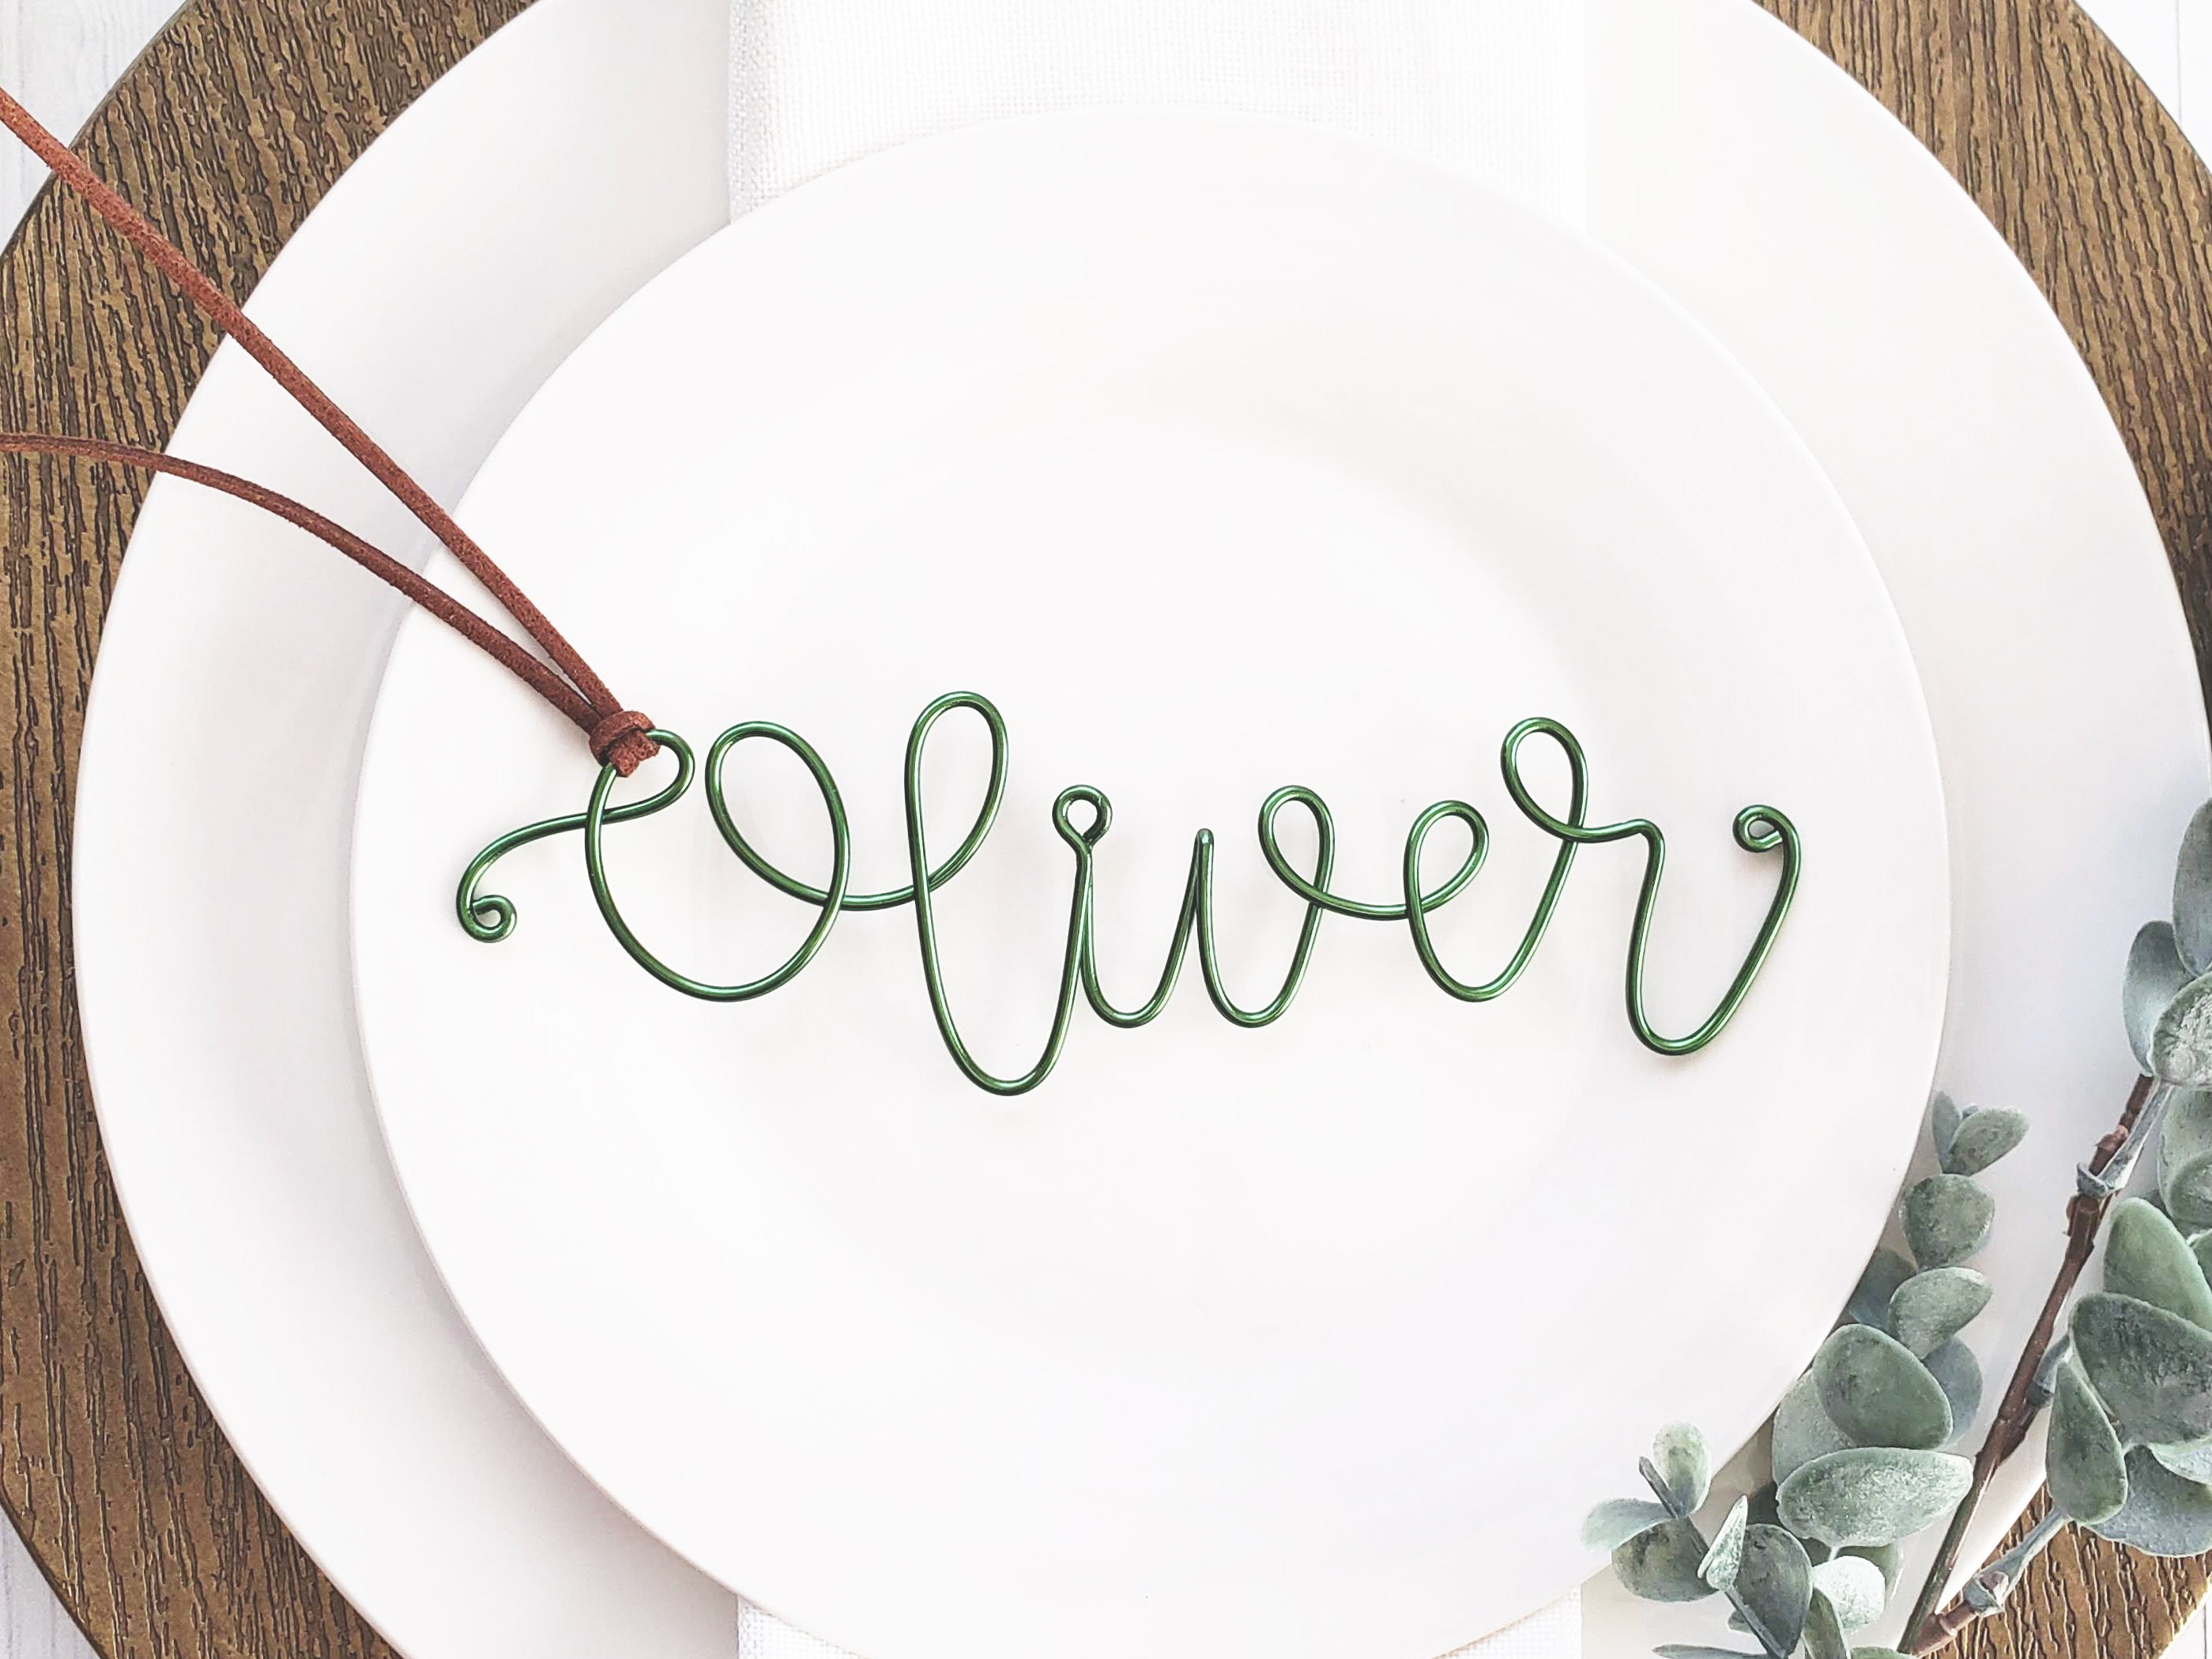 Wire Name Place Setting